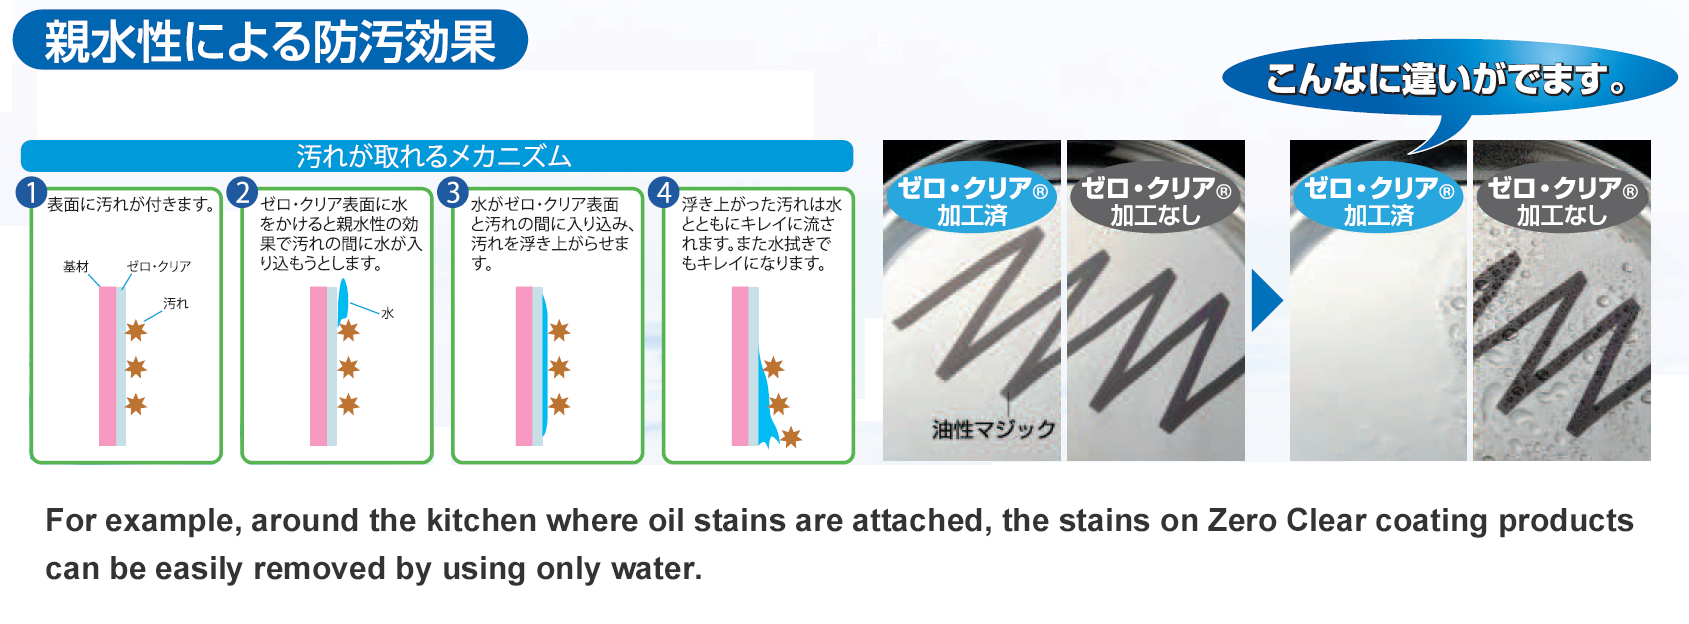 For example, around the kitchen where oil stains are attached, the stains on Zero Clear coating products can be easily removed by using only water.